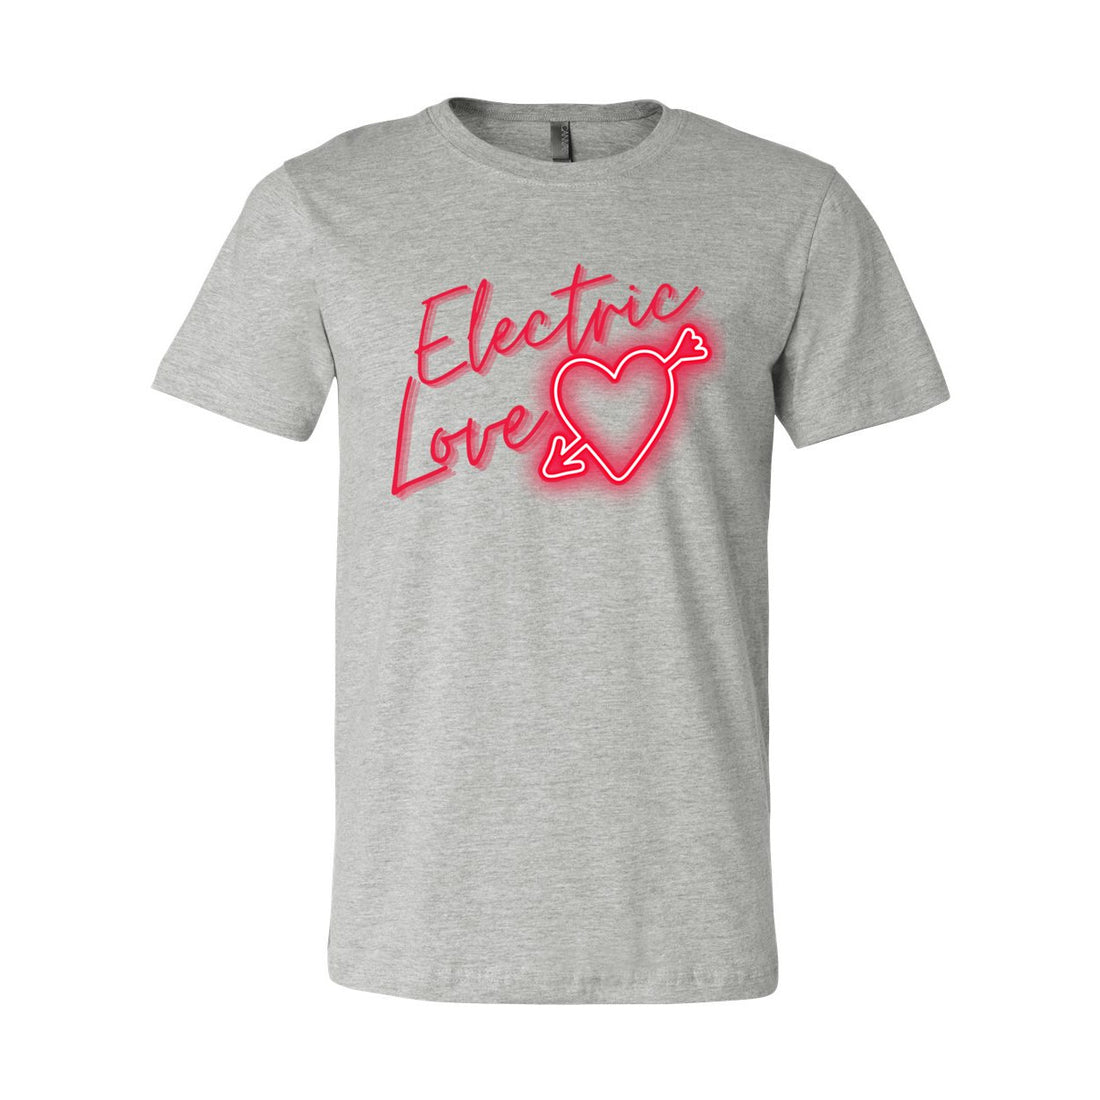 Electric Love Jersey Tee - T-Shirts - Positively Sassy - Electric Love Jersey Tee